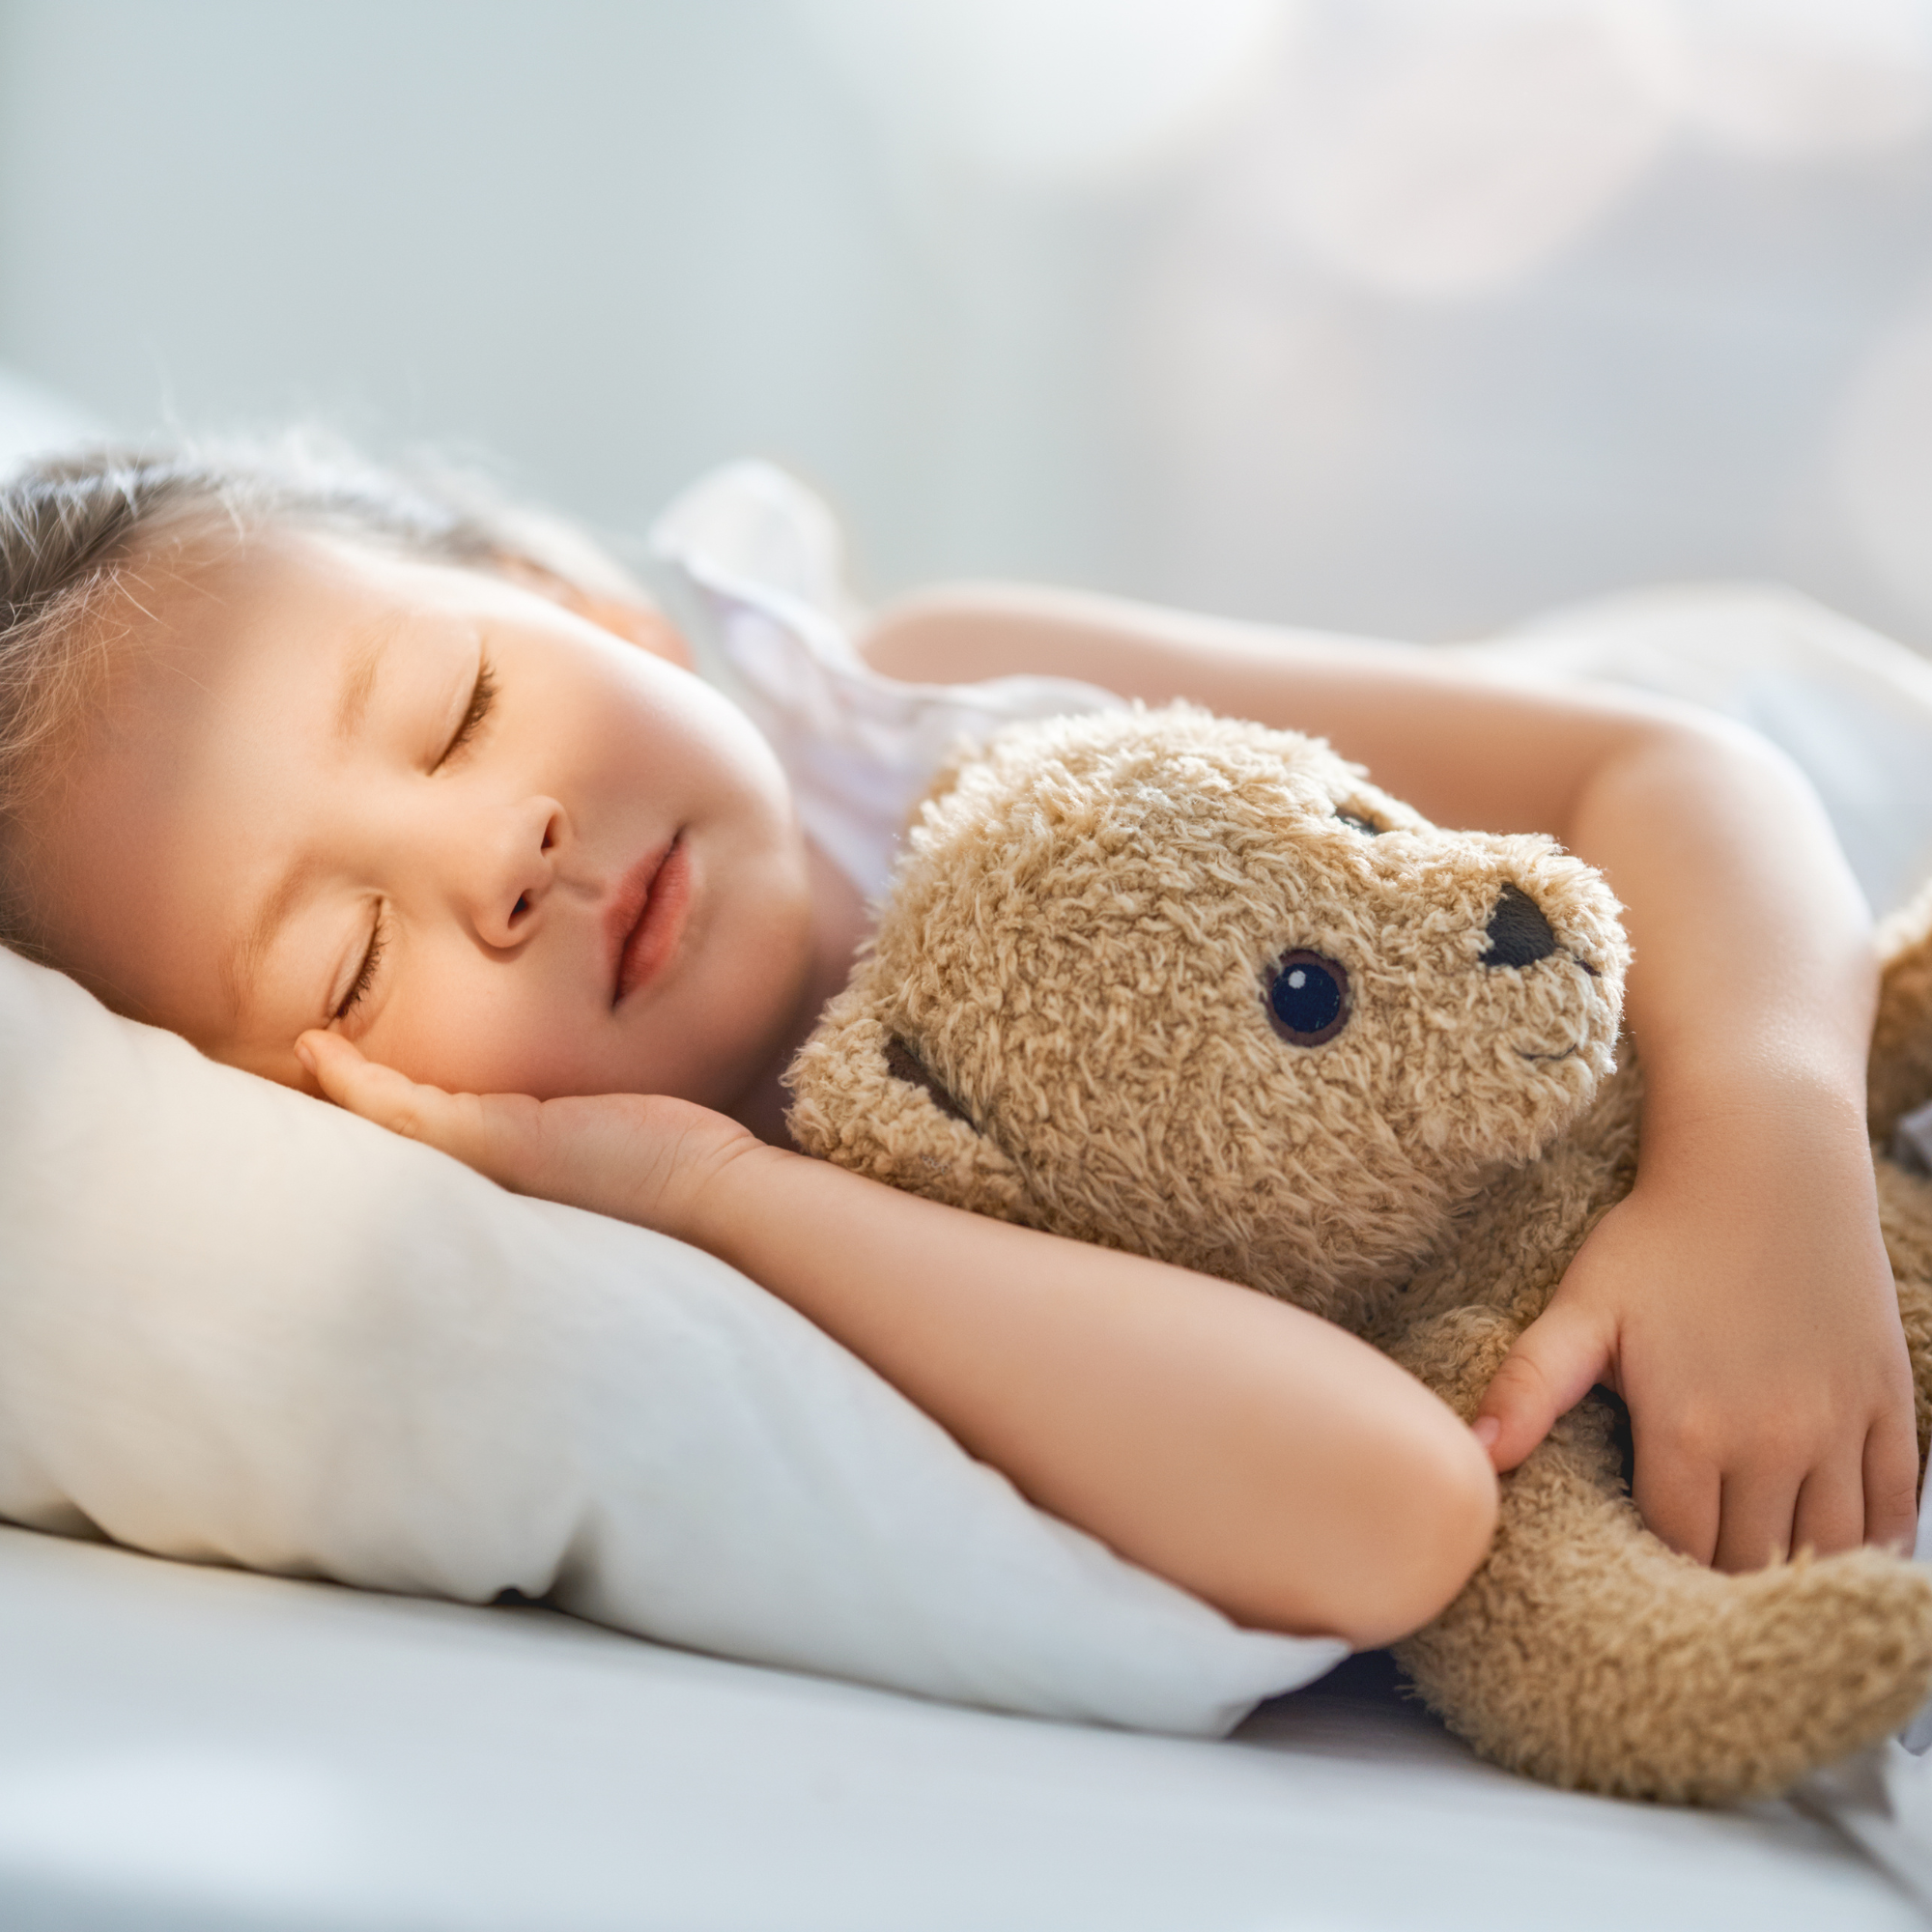 Girl lying asleep on a pillow in bed with her teddy bear | Parenting tips and advice - Clair de Lune UK